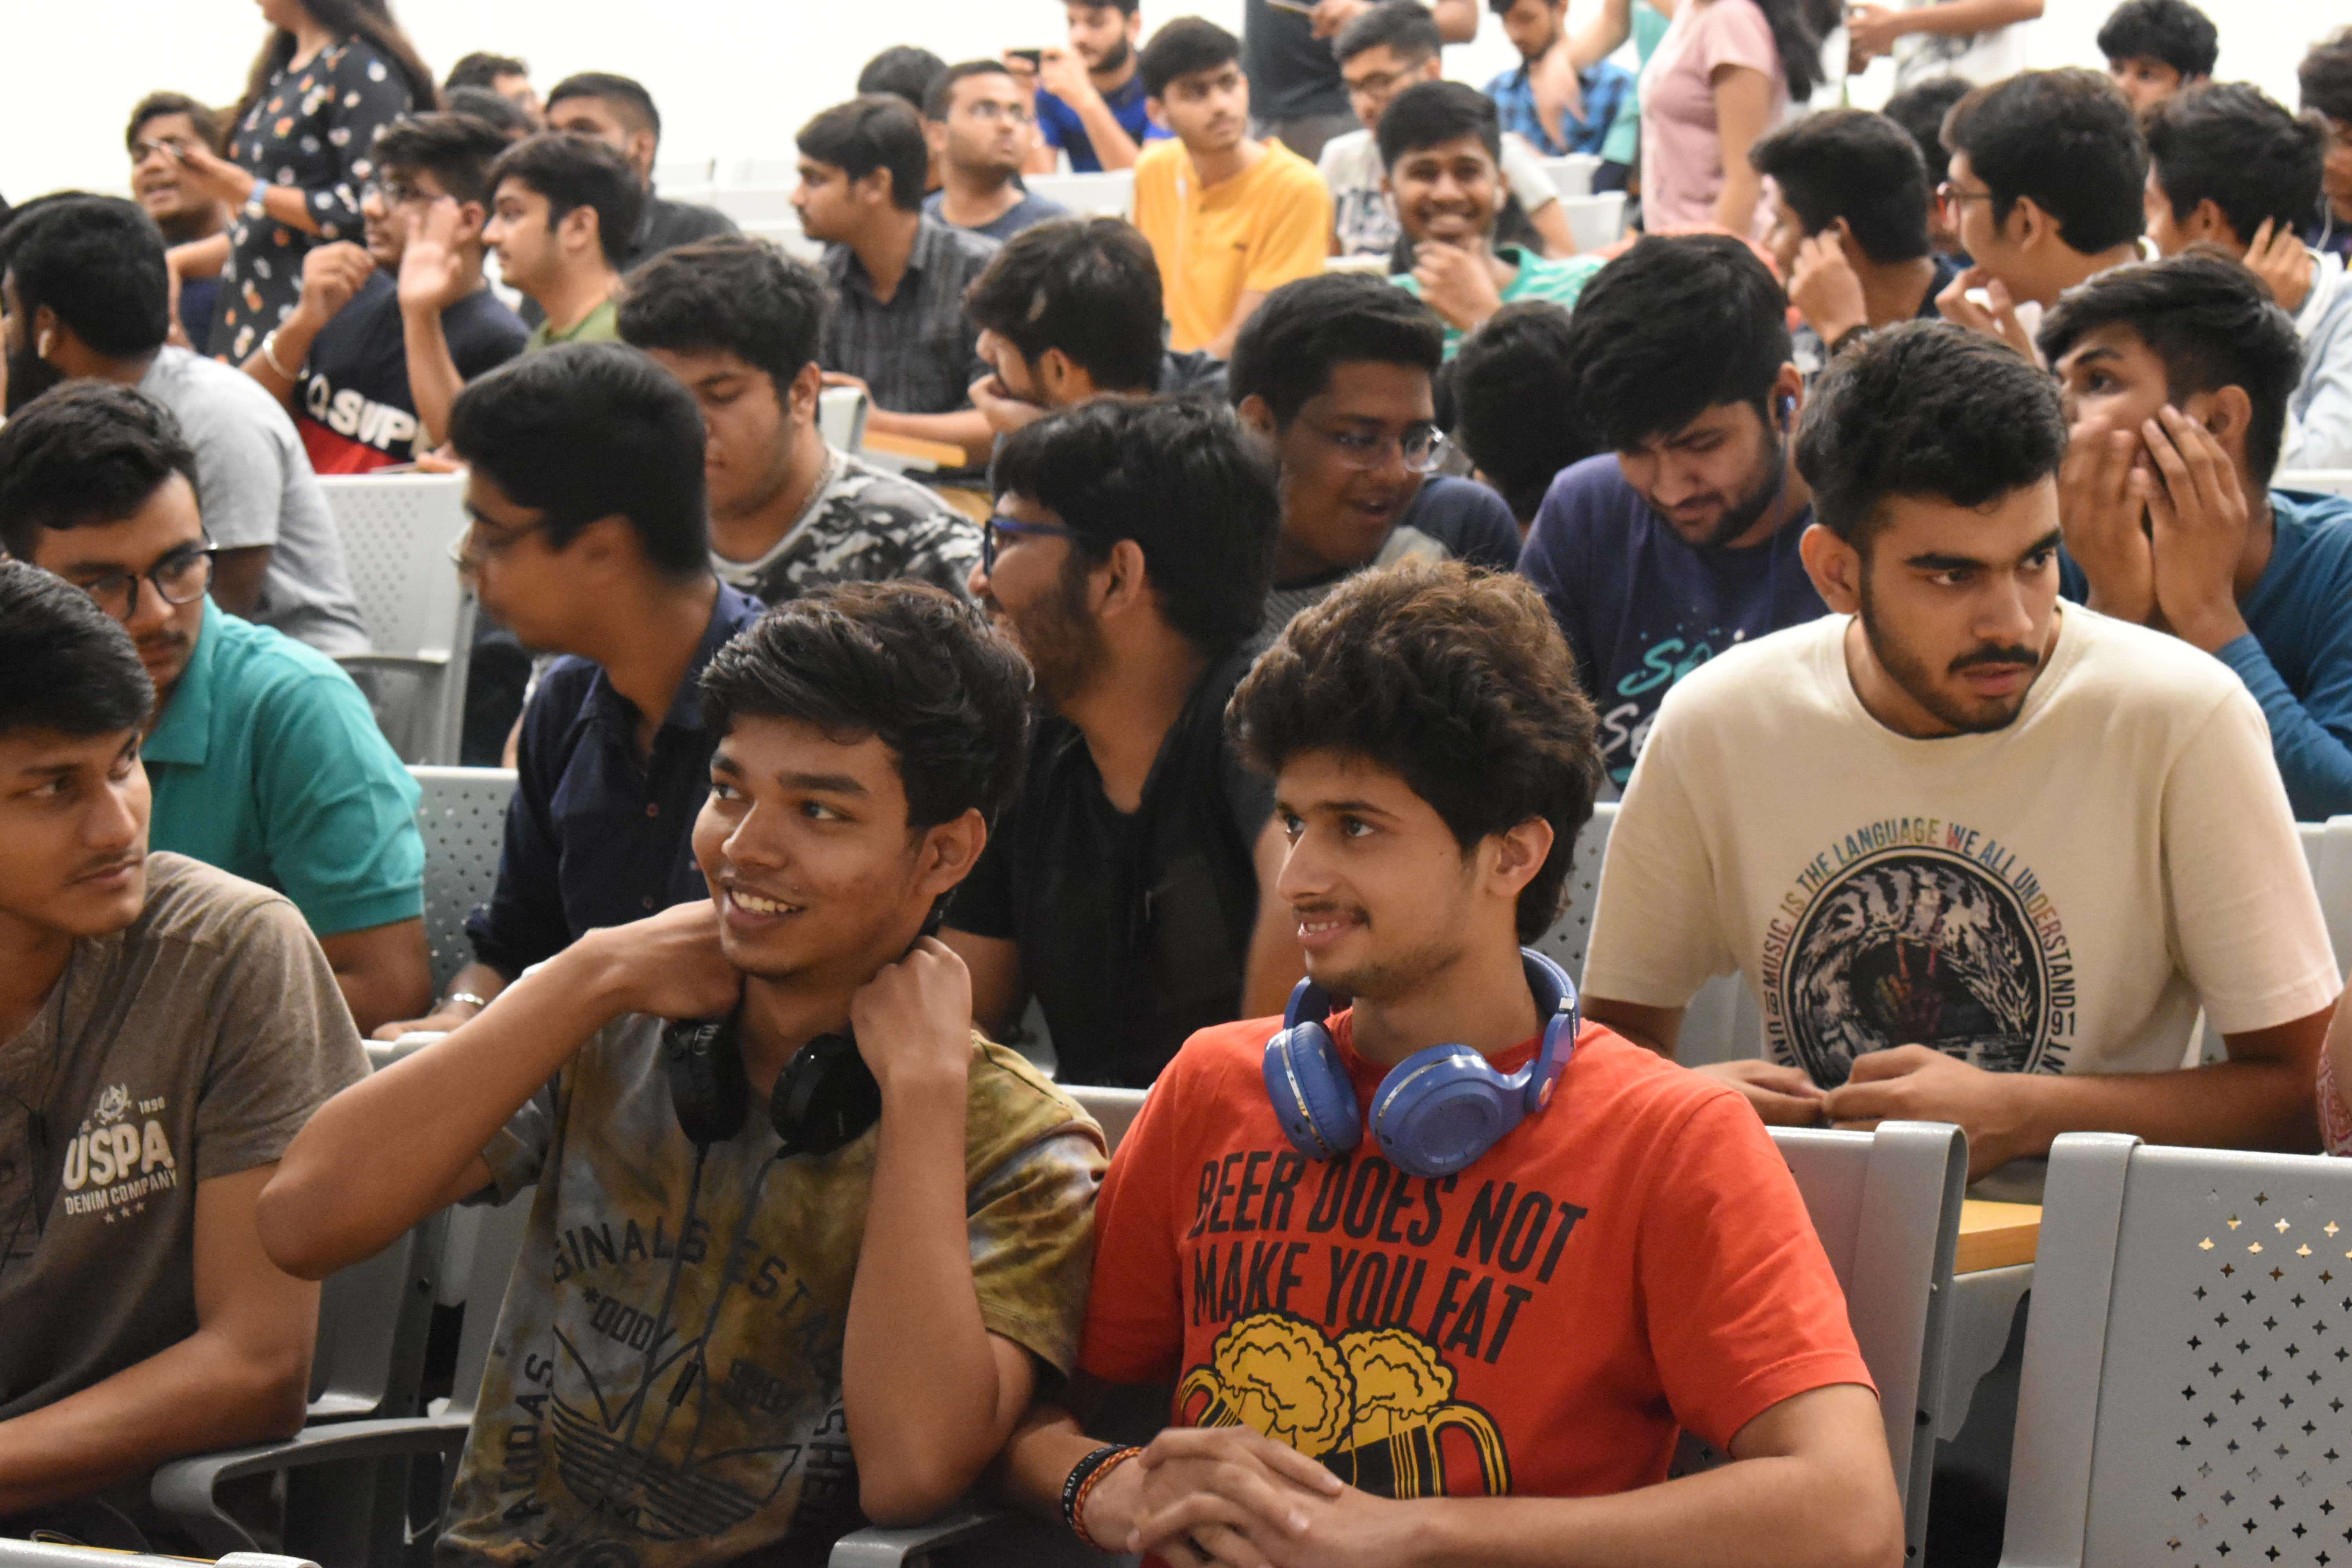 Avid and enthusiastic PUBG players waiting eagerly for the tournament, organised by Pulse, a club at Bennett University, to begin